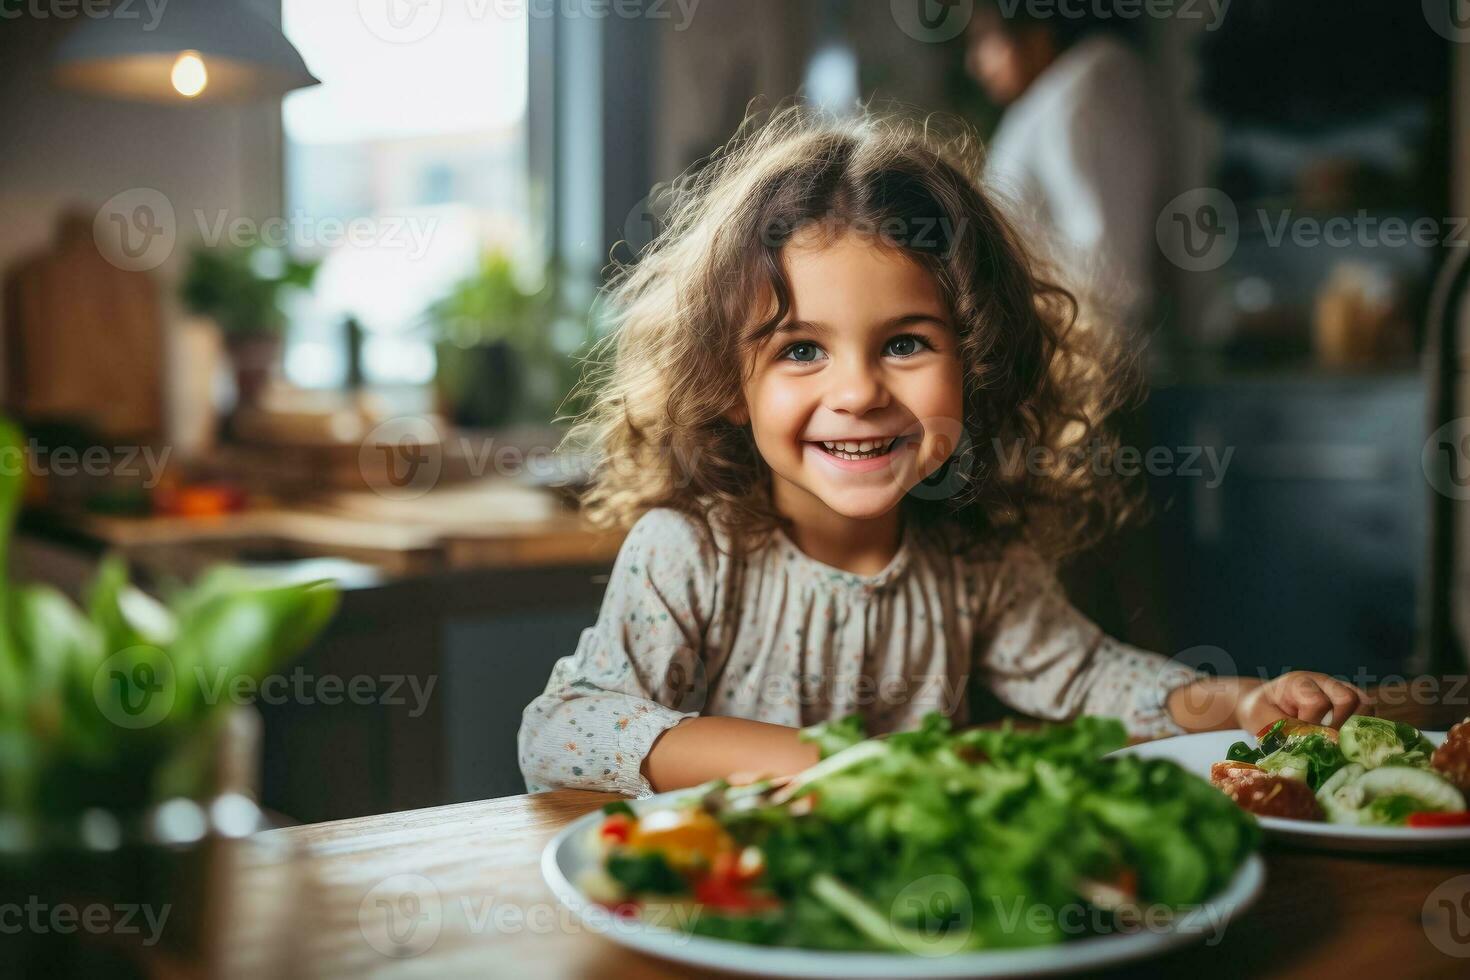 A close-up shot of a smiling mother preparing a healthy meal for her baby using fresh organic ingredients photo